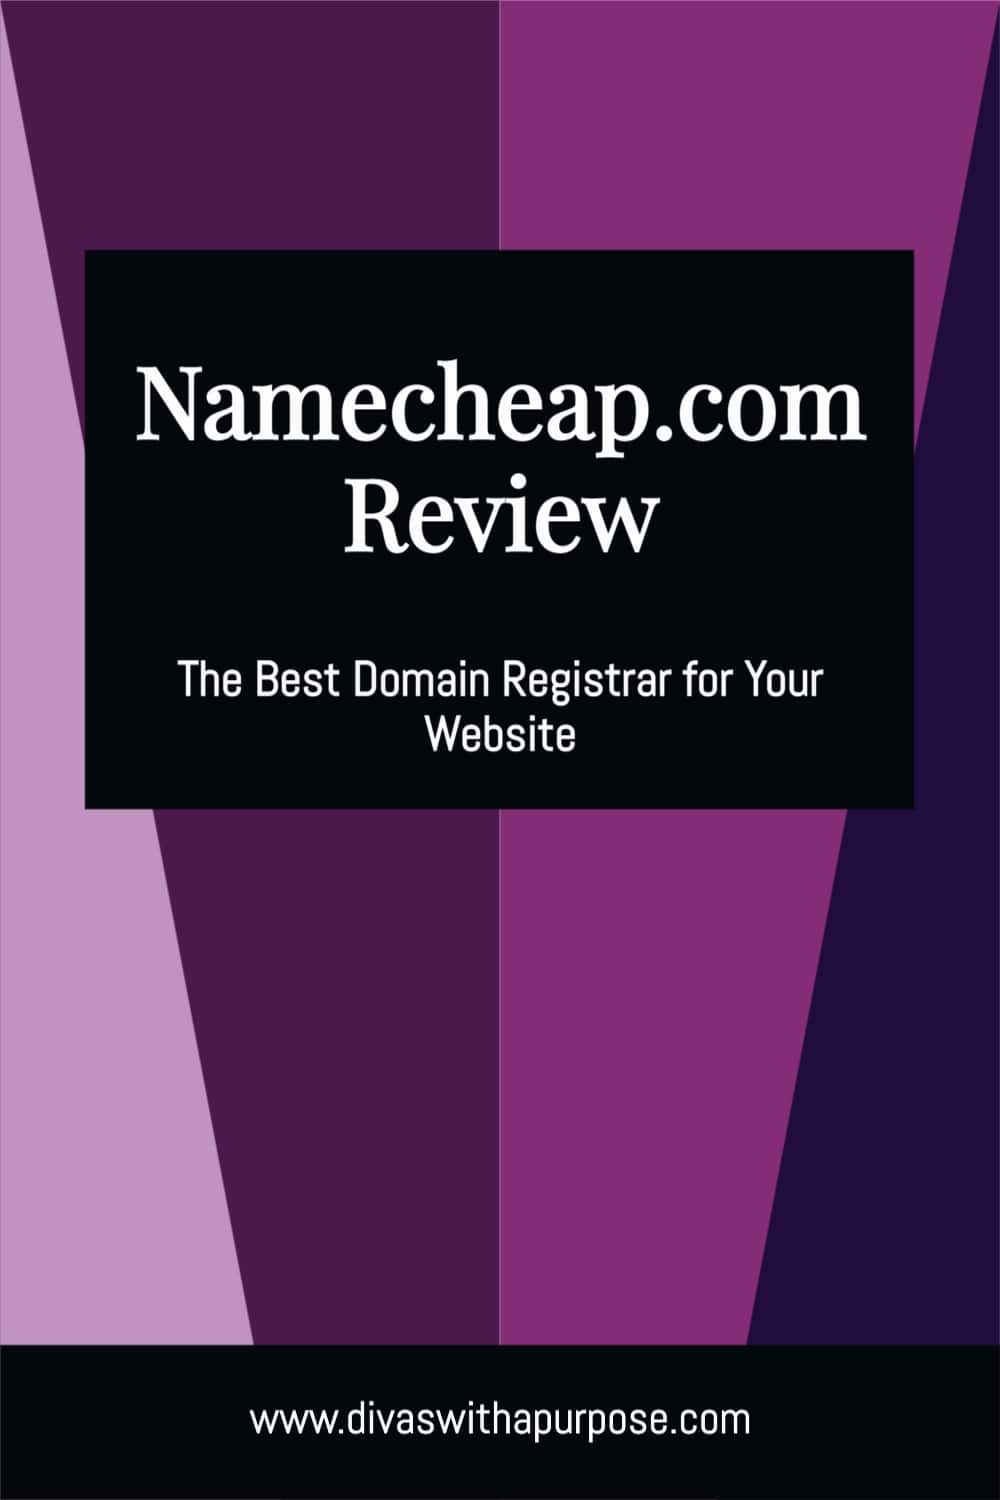 A Namecheap review to share why they are one of the best domain registrars to consider using for your business.